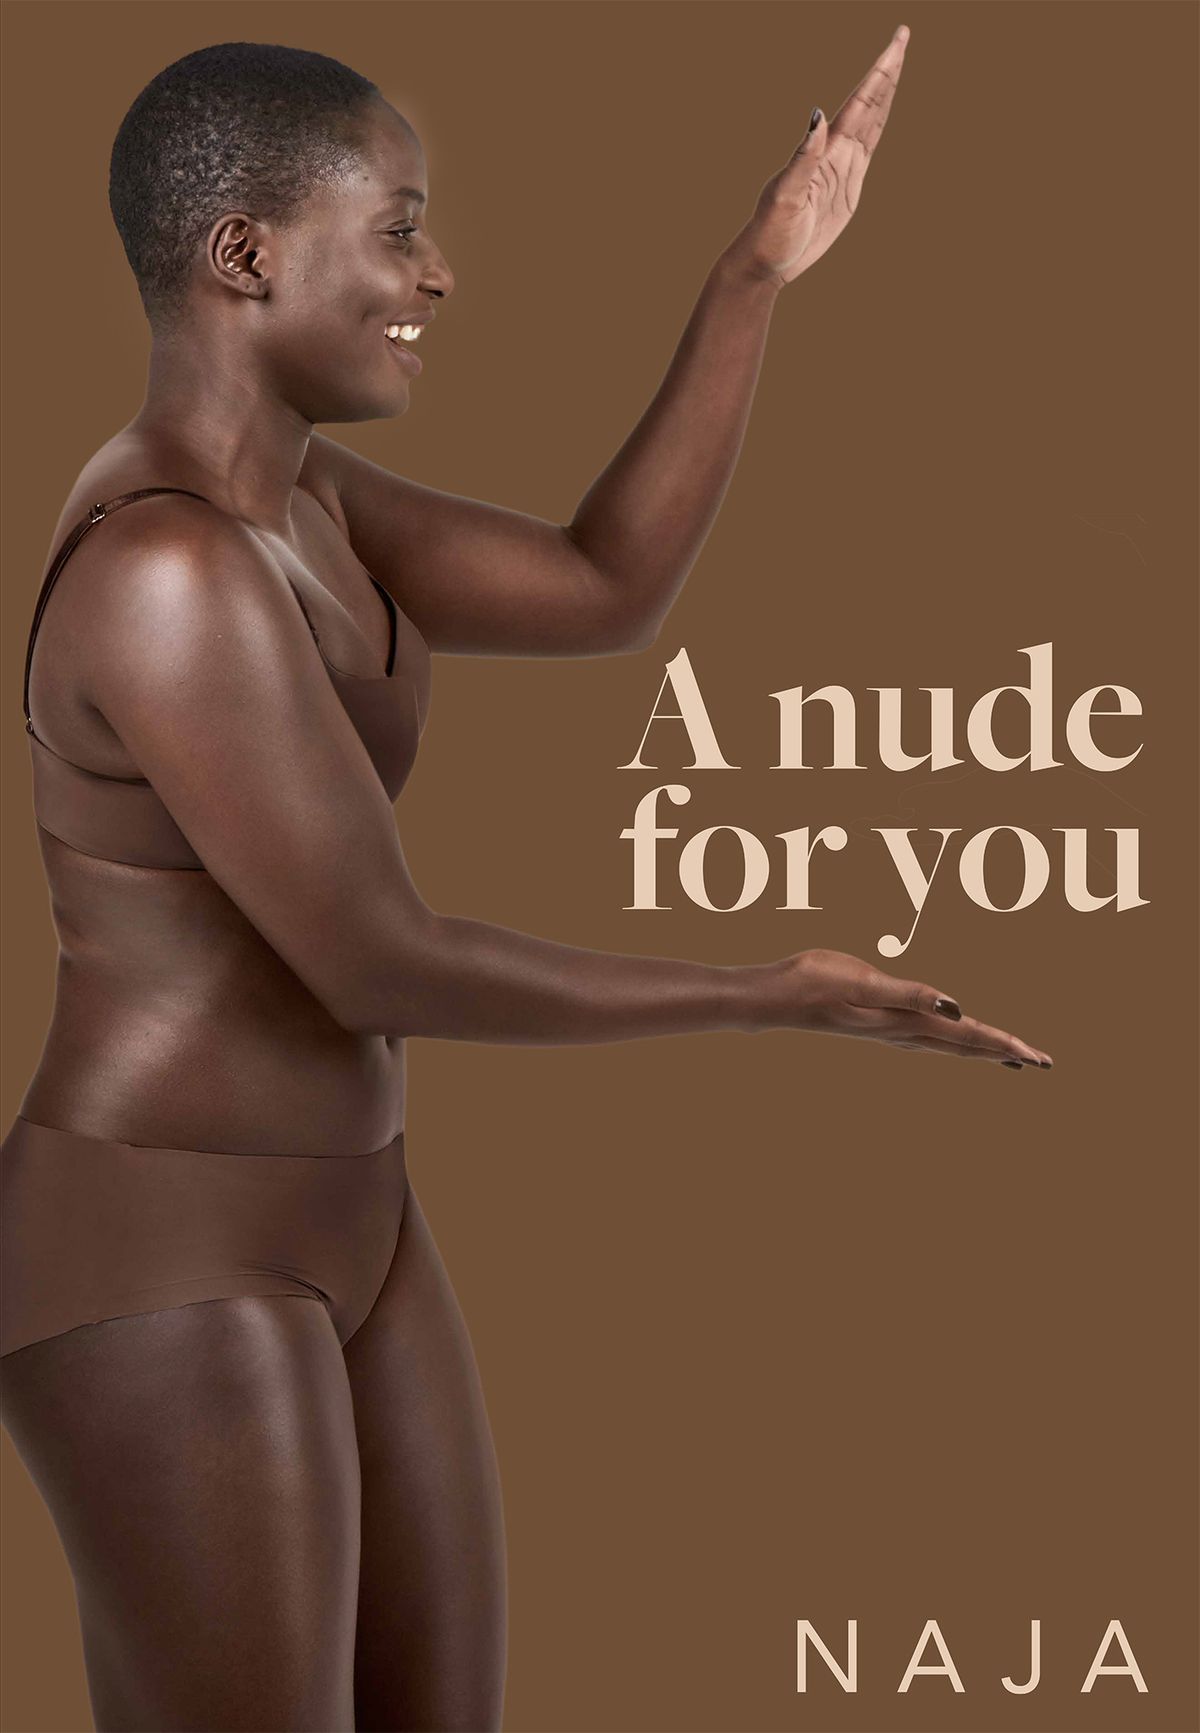 The Lingerie Brand Making ‘Nude For All’ Underwear a Reality